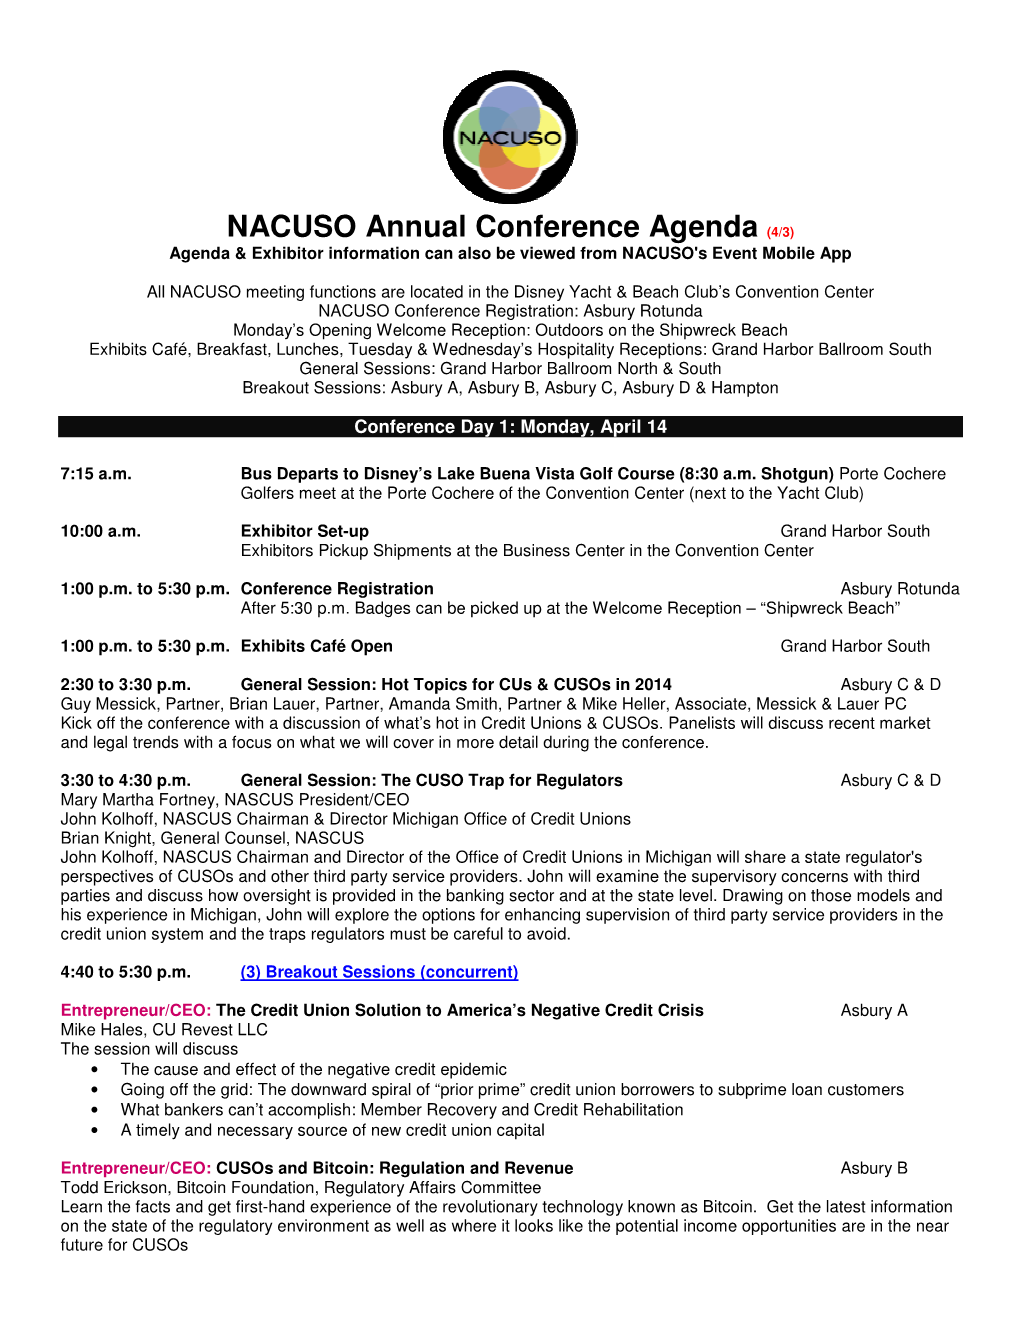 NACUSO Annual Conference Agenda (4/3) Agenda & Exhibitor Information Can Also Be Viewed from NACUSO's Event Mobile App